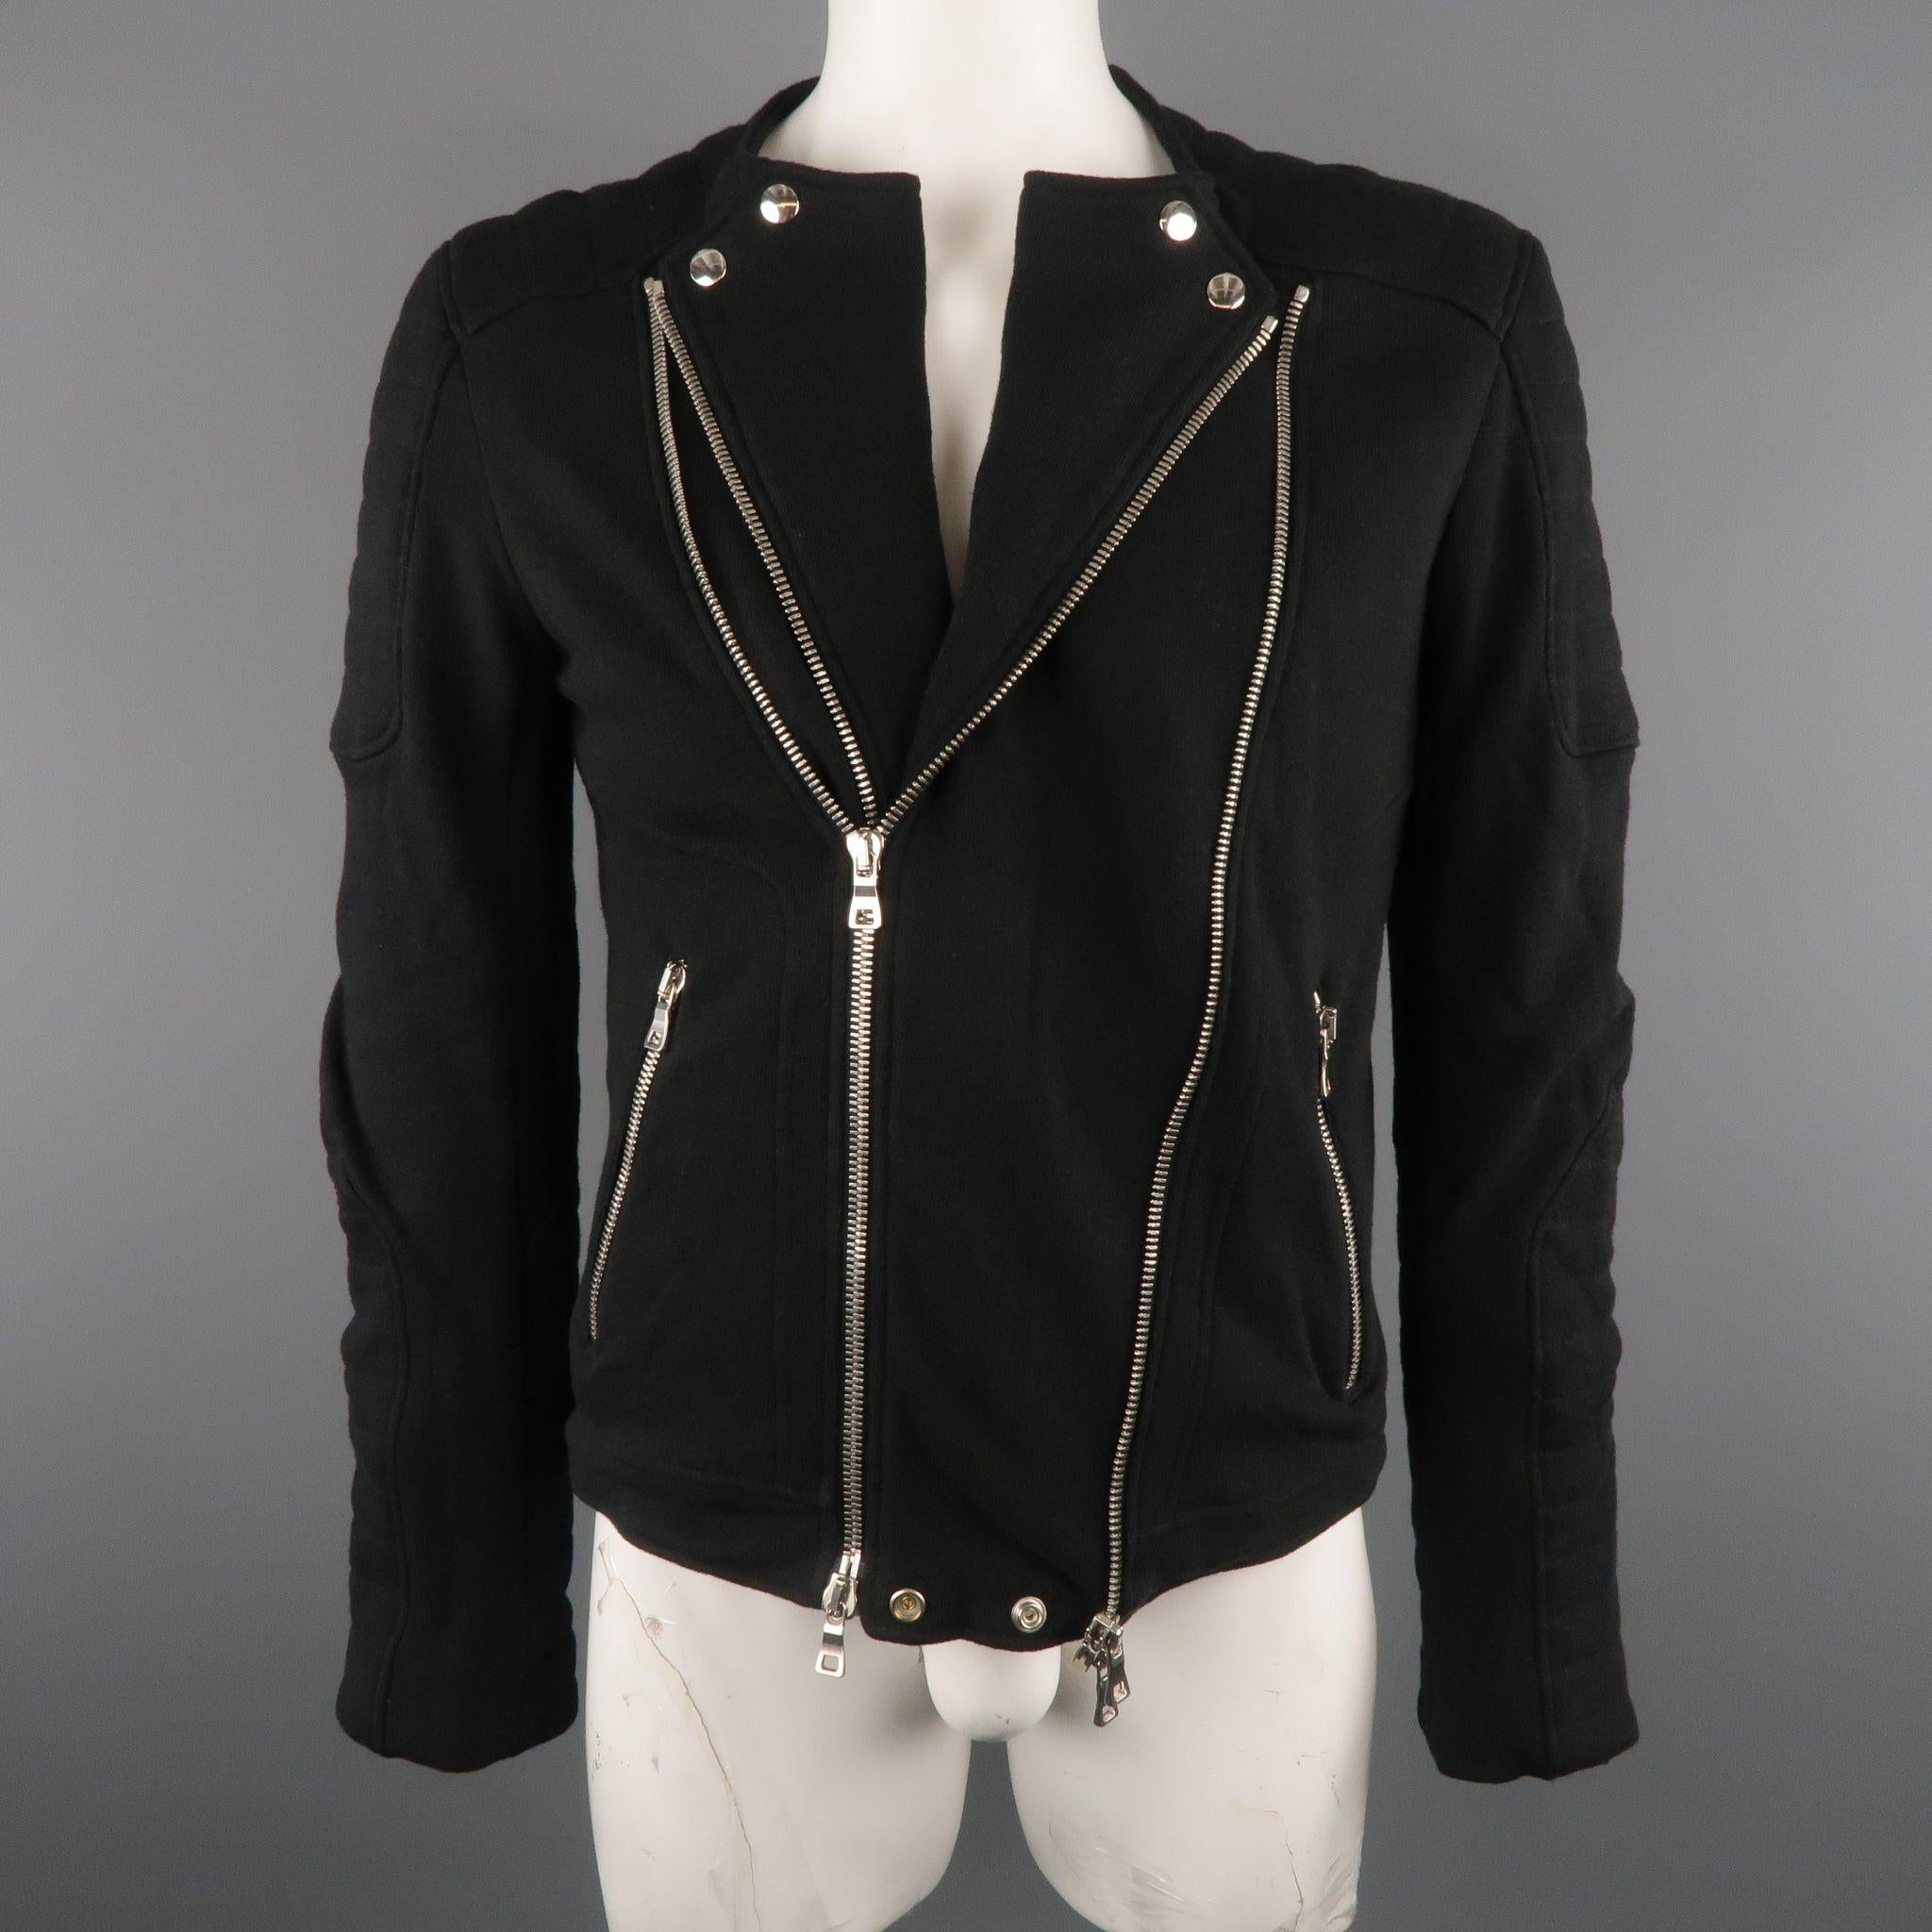 BALMAIN Motorcycle Jacket comes in a black tone in a solid cotton / linen material, with a crewneck, zip and snaps closure, zip pockets and cuffs. Made in Romania.

Excellent Pre-Owned Condition.
Marked: L

Measurements:

l Shoulder: 17.5 in.
l